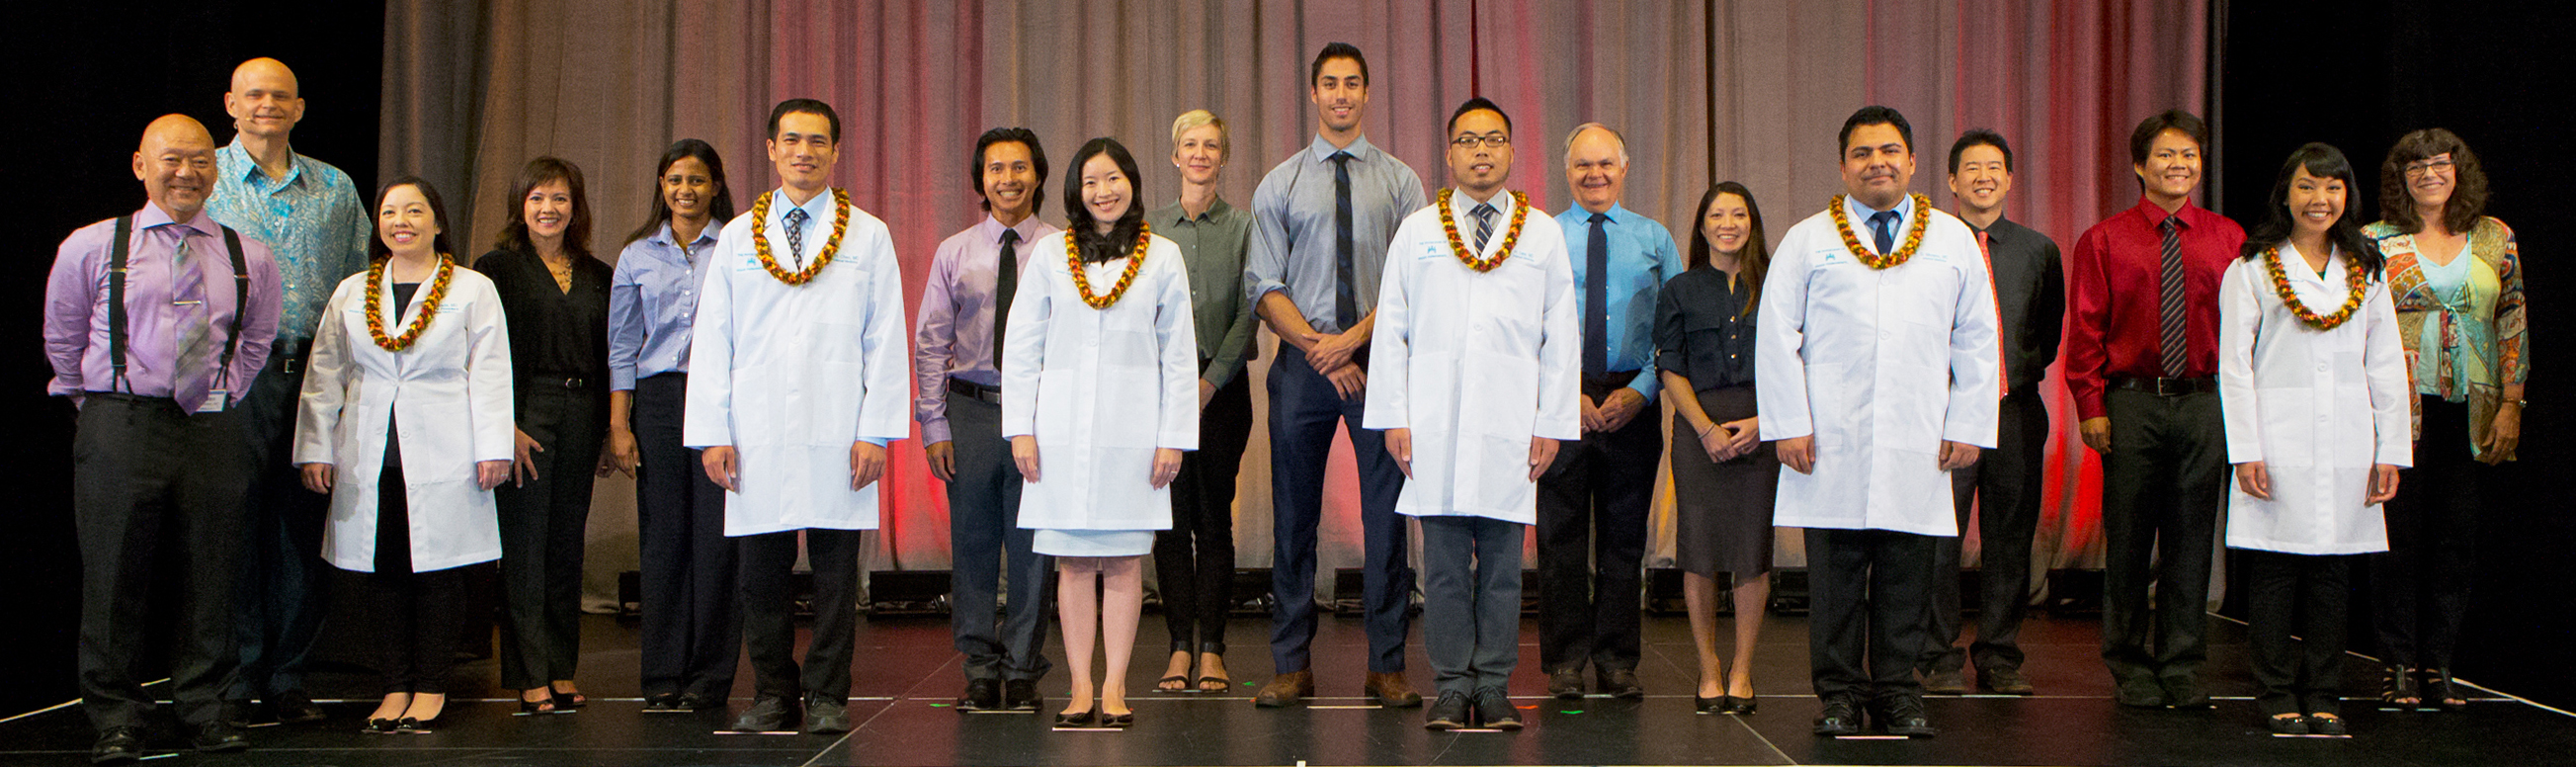 HPMG Welcomes Residents With Annual White Coat Ceremony